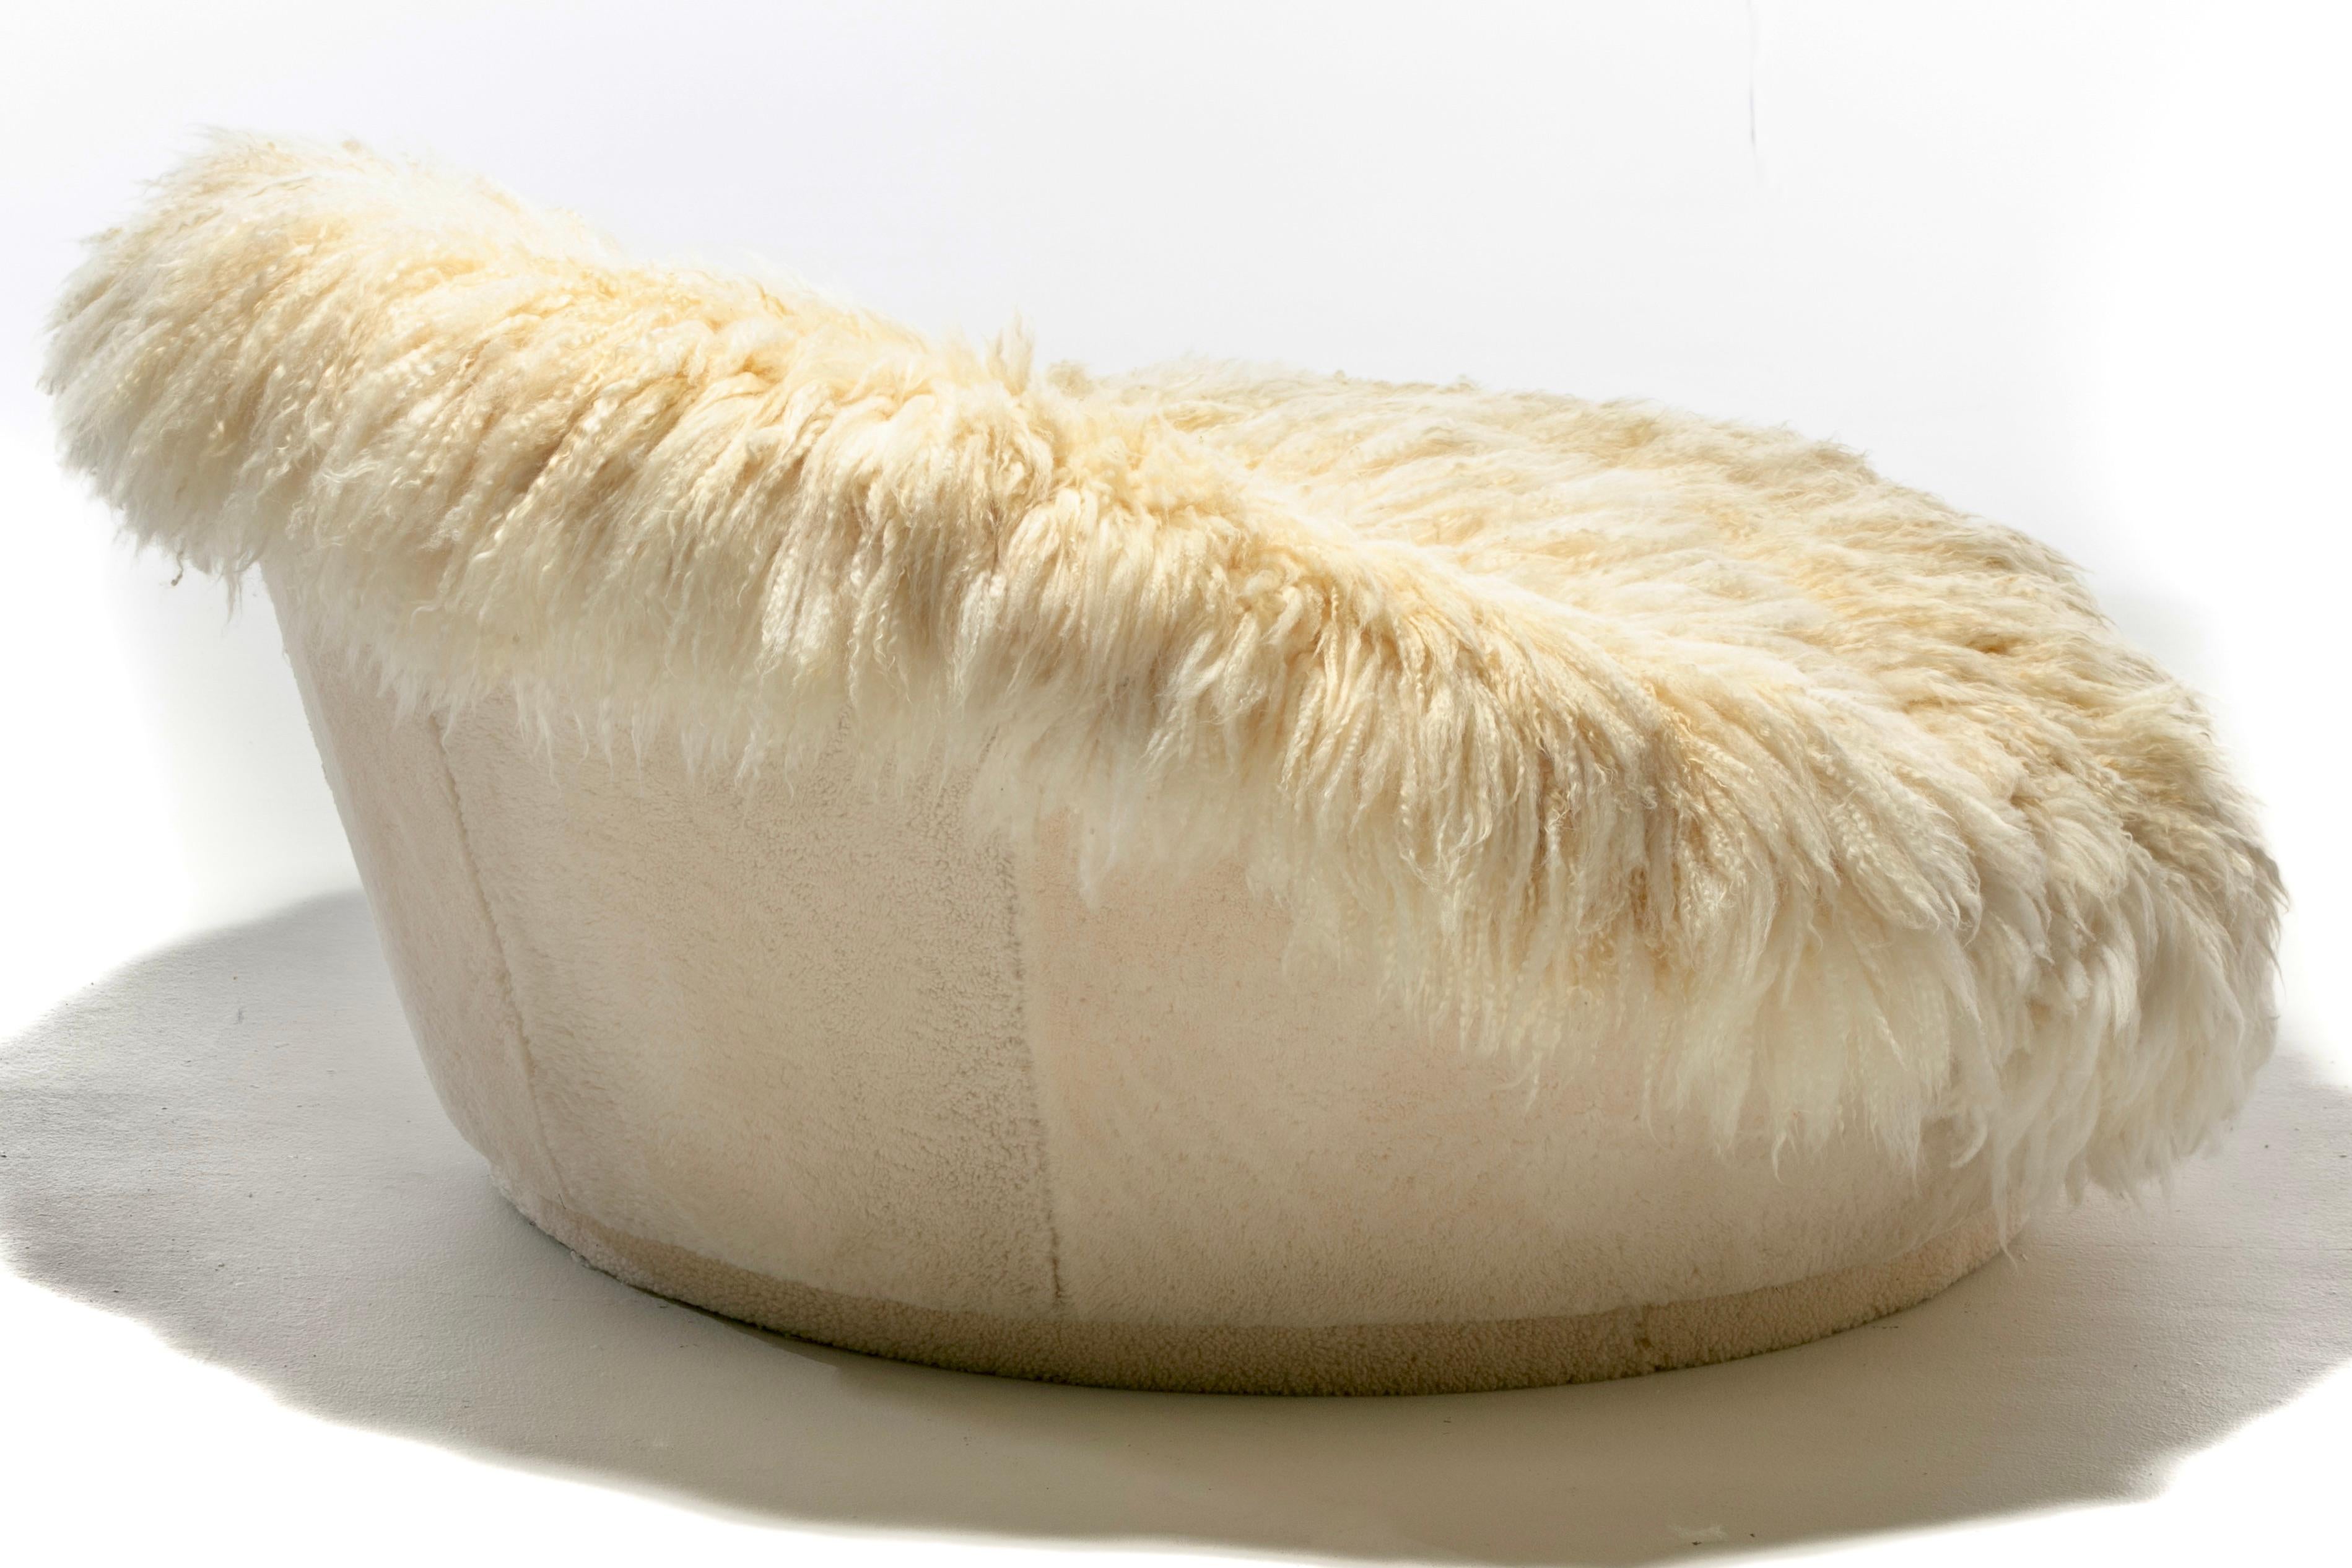 Milo Baughman Style Satellite Lounge in Napa Valley Sheepskins & Ivory Shearling In Good Condition For Sale In Saint Louis, MO